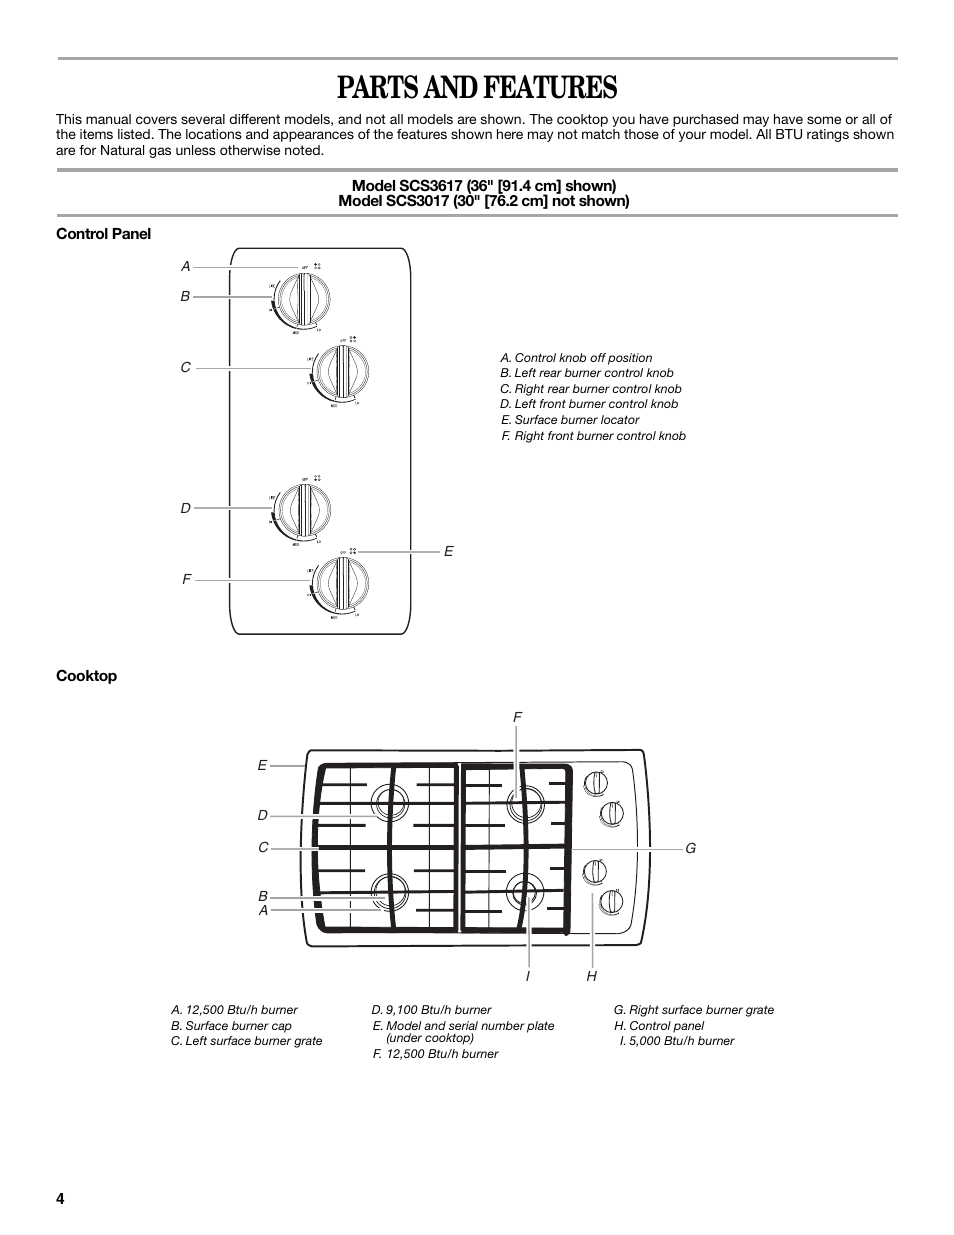 Parts and features | Whirlpool GLS3675 Manuel d'utilisation | Page 4 / 24